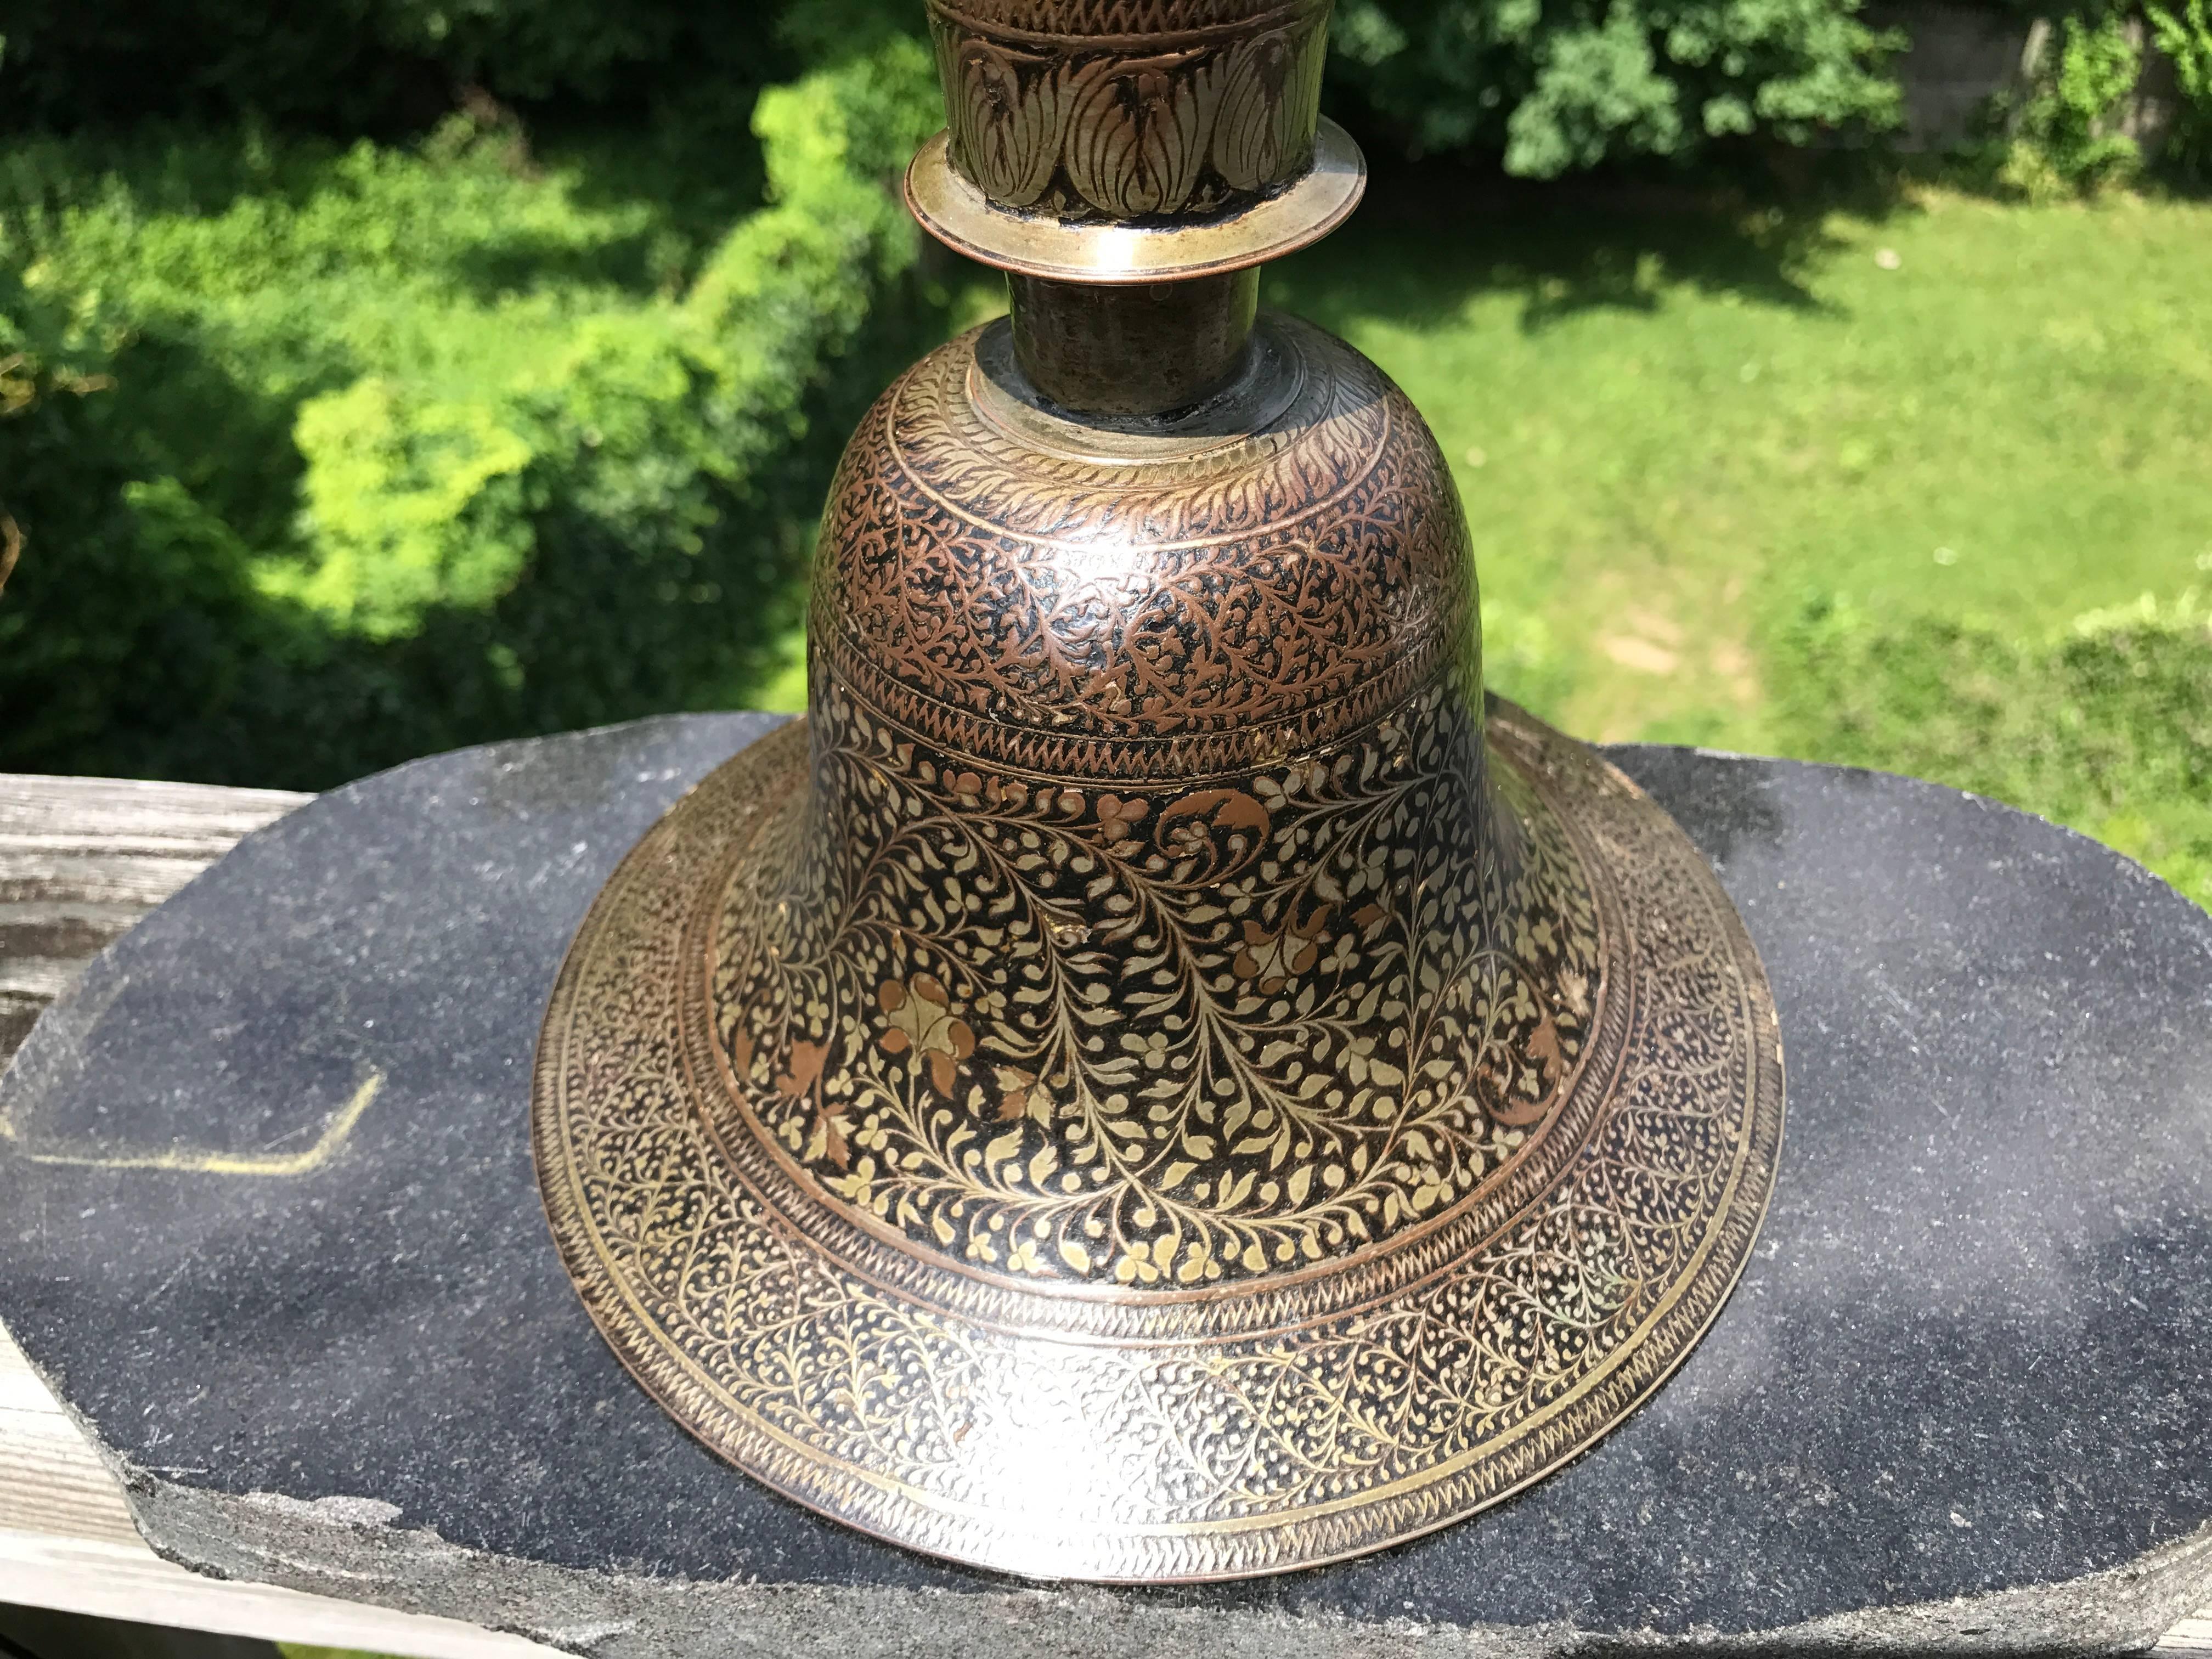 This hookah base of elegant bell form, with a round, flared neck with a collar is decorated overall with an intricate floral pattern in inlaid silver and brown and black lacquer. 
A huqqa or hookah is a traditional water pipe, smoking instrument